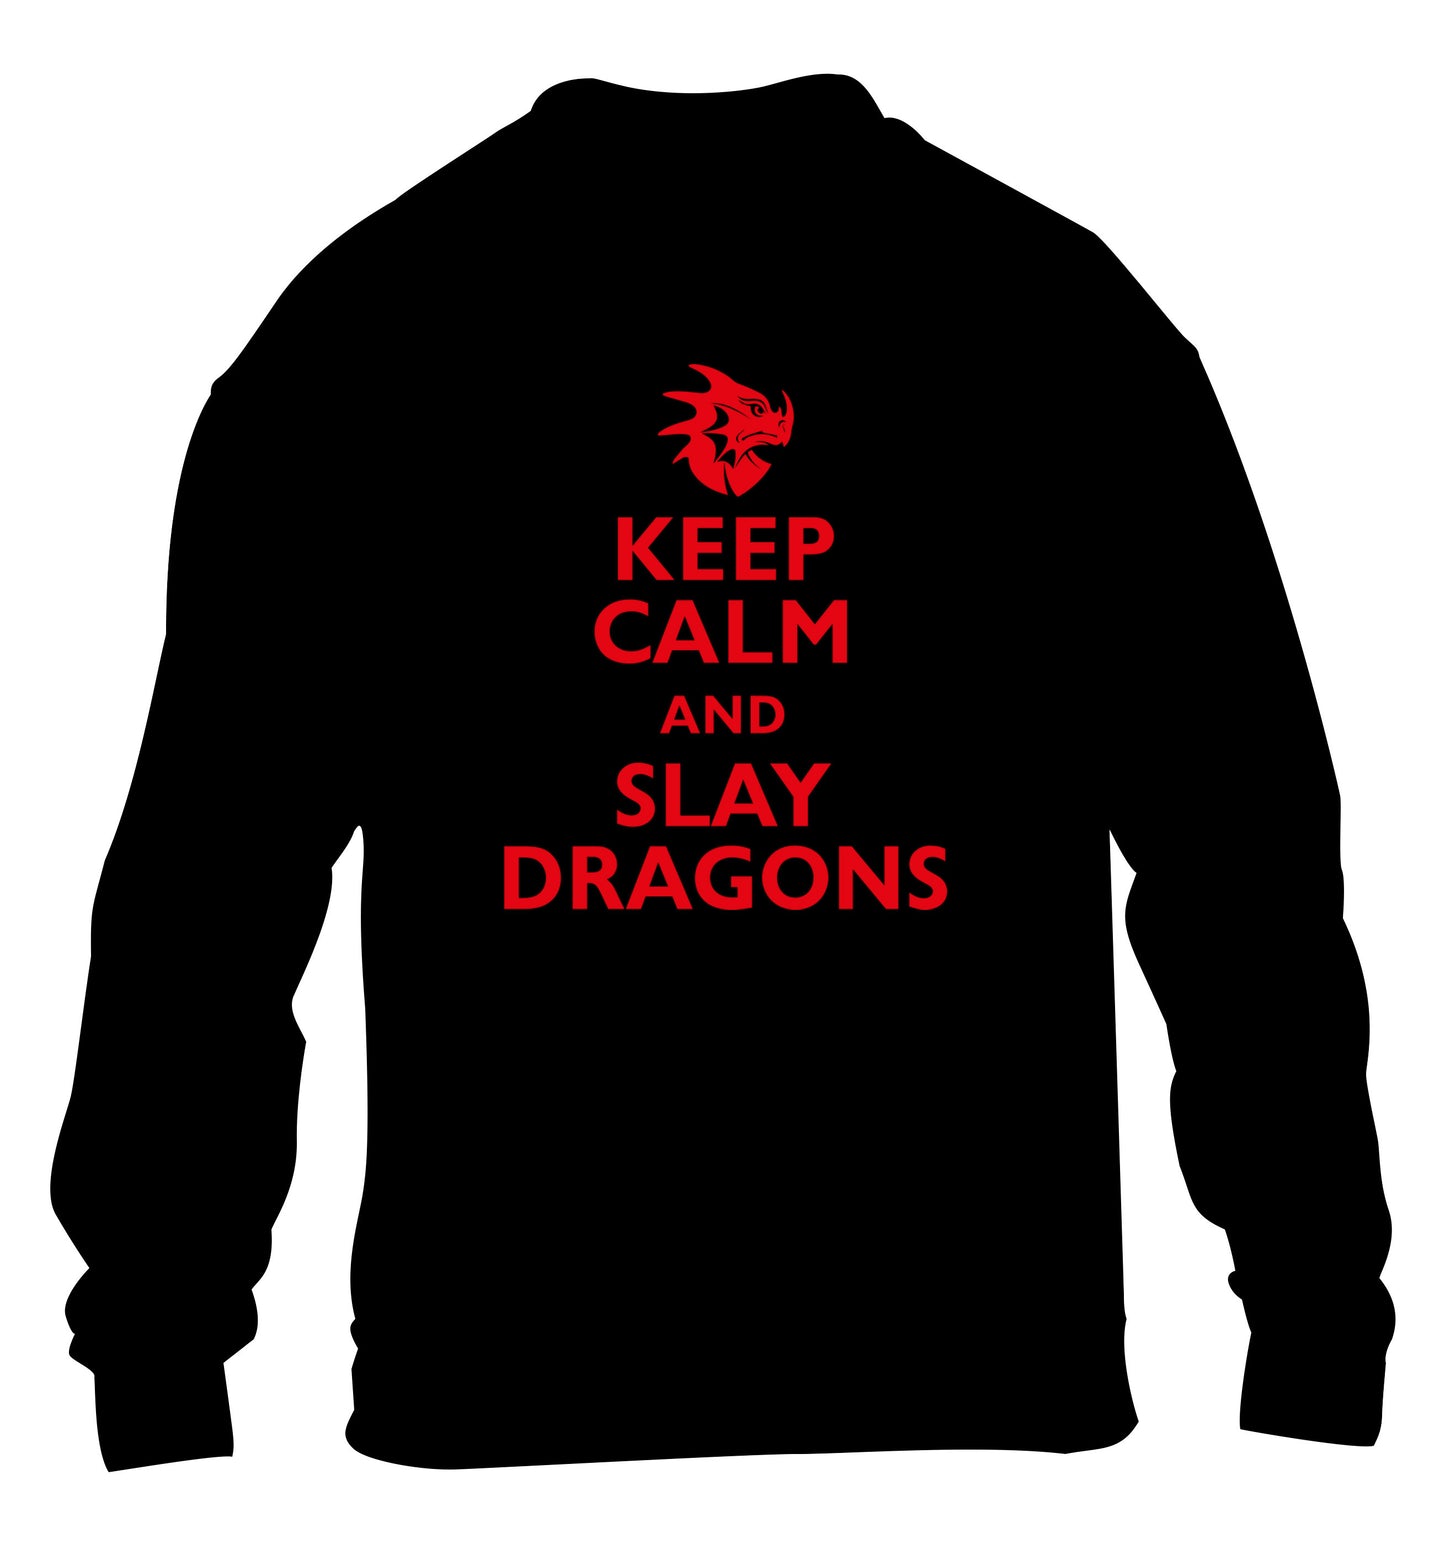 Keep calm and slay dragons children's black sweater 12-14 Years